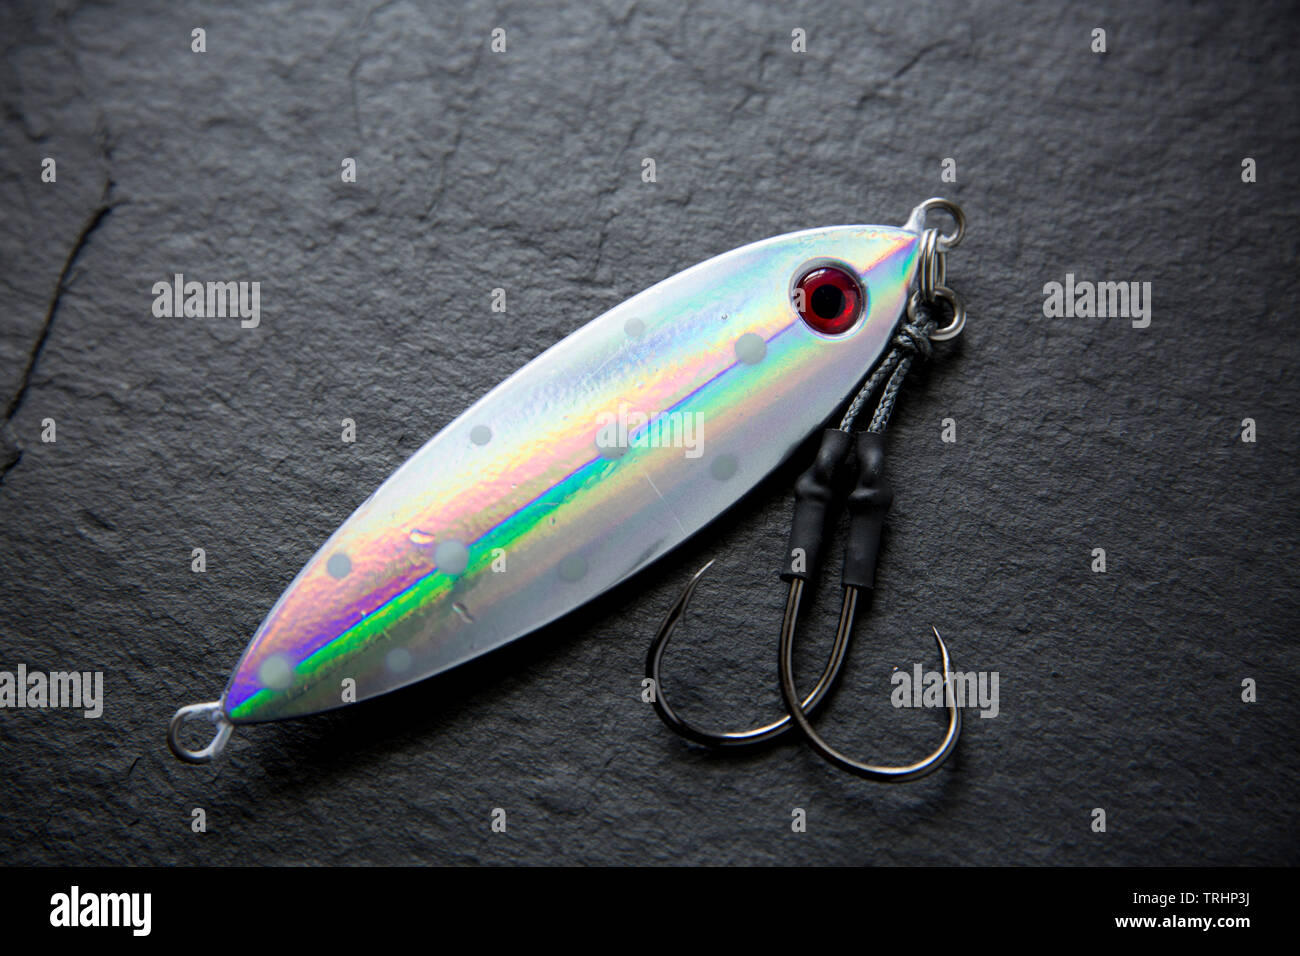 A metal HTO Osoi fishing lure. Lures such as these are used normally for sea fishing from a boat when drifting over wrecks and reefs to catch such fis Stock Photo